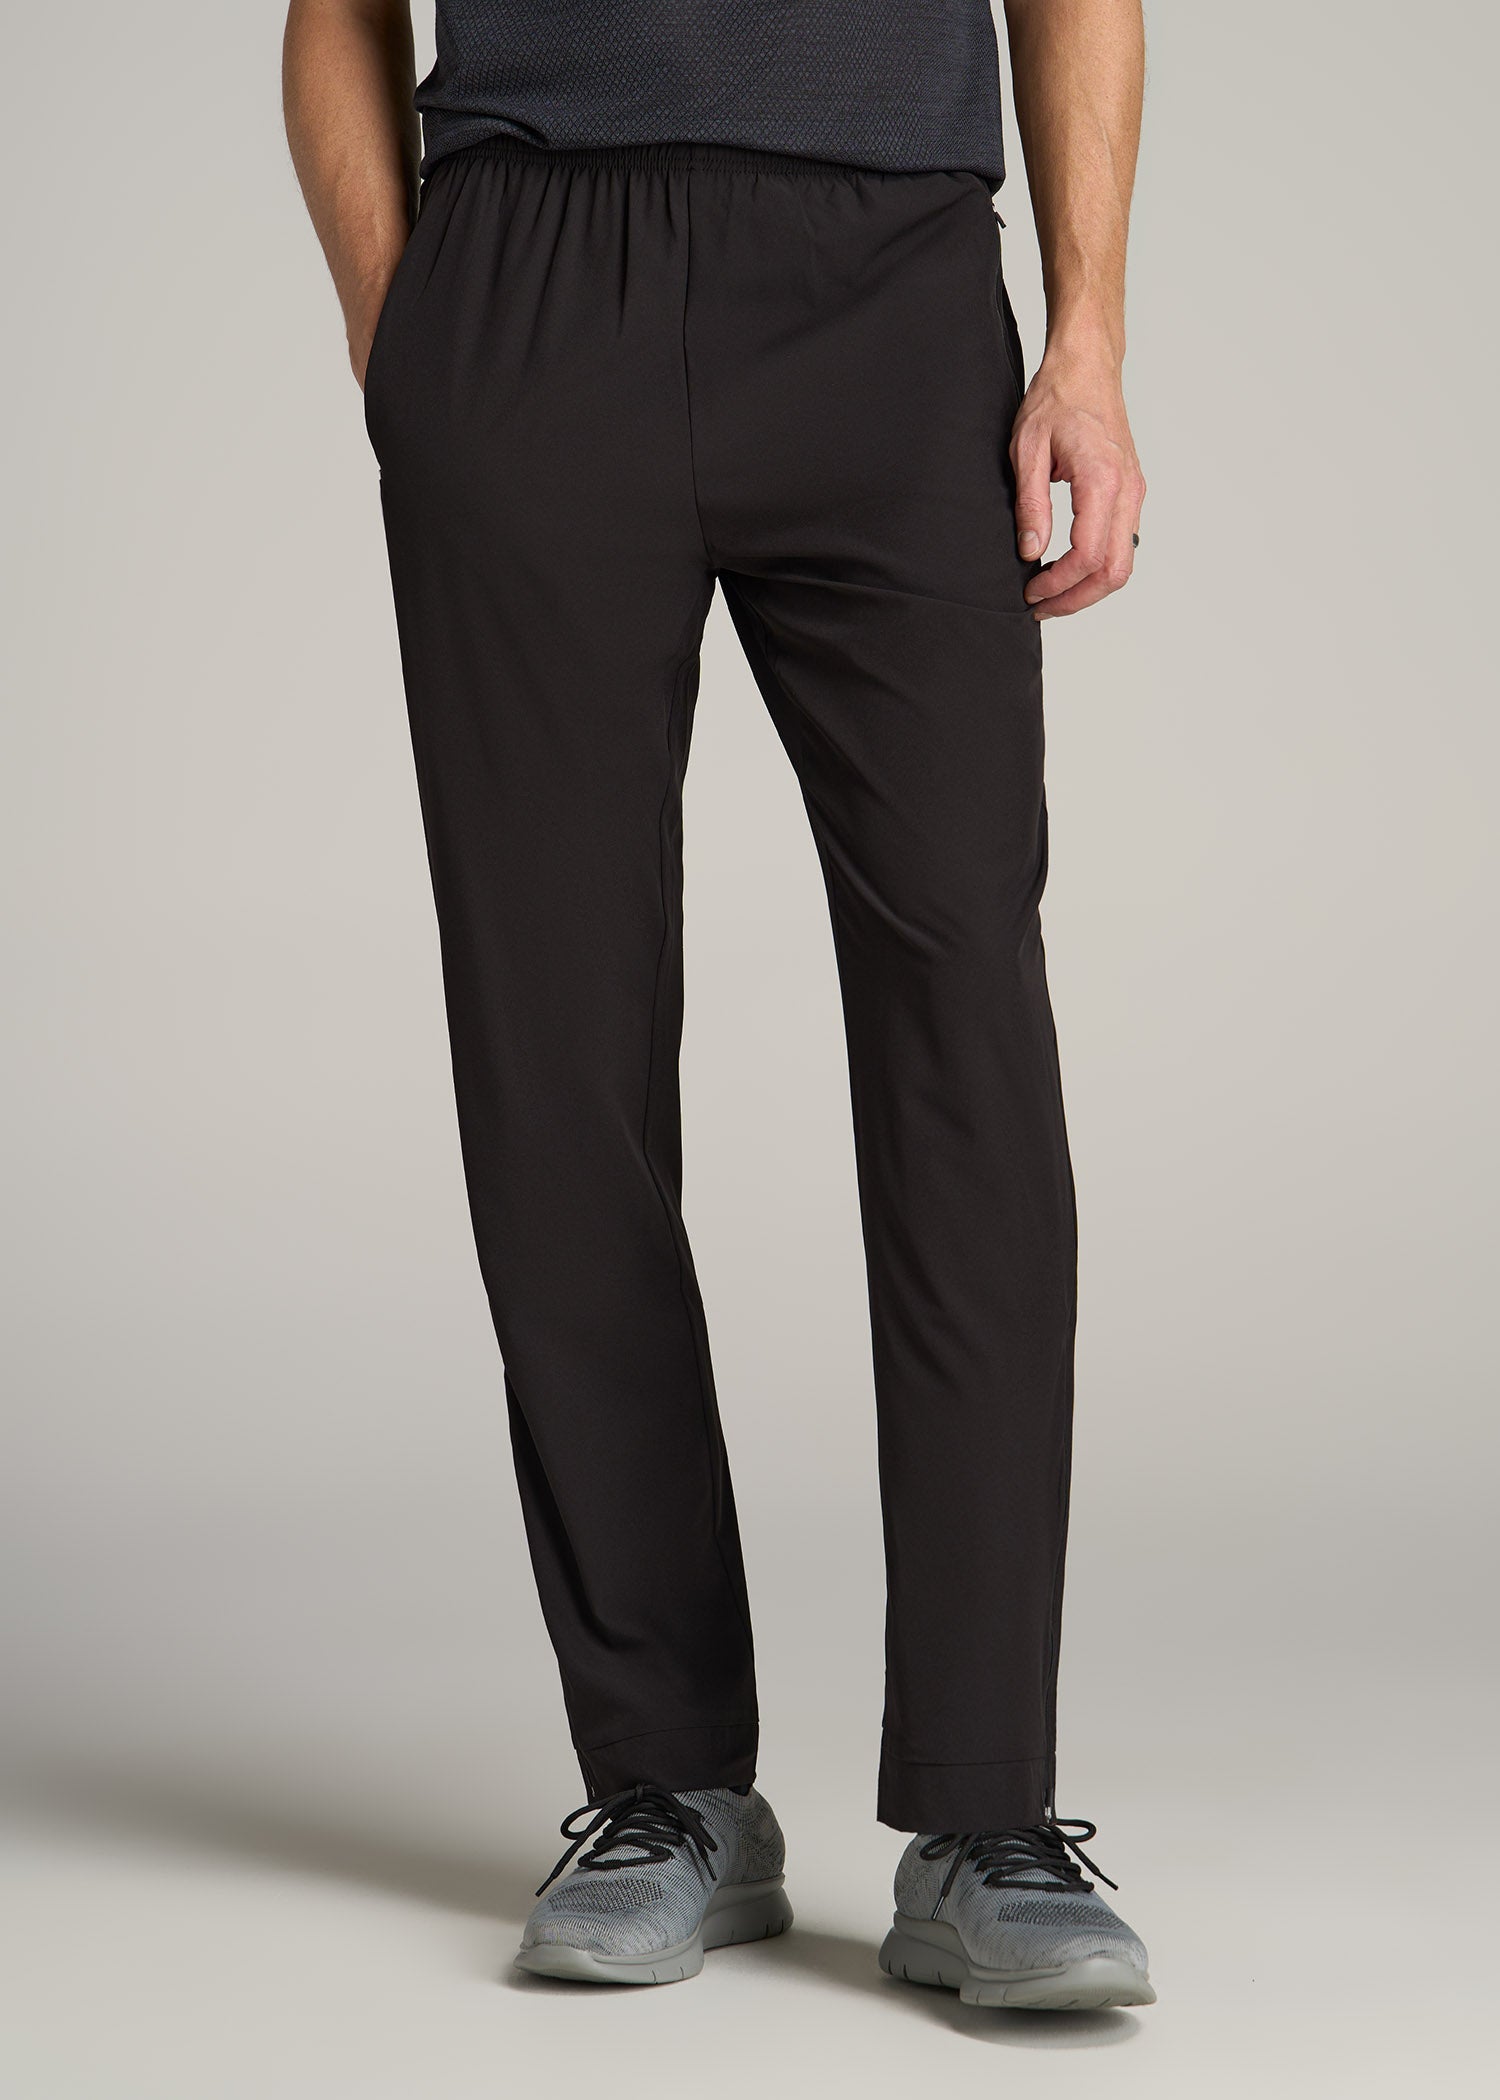 Relaxed Fit Tall Training Pant Black For Men | American Tall